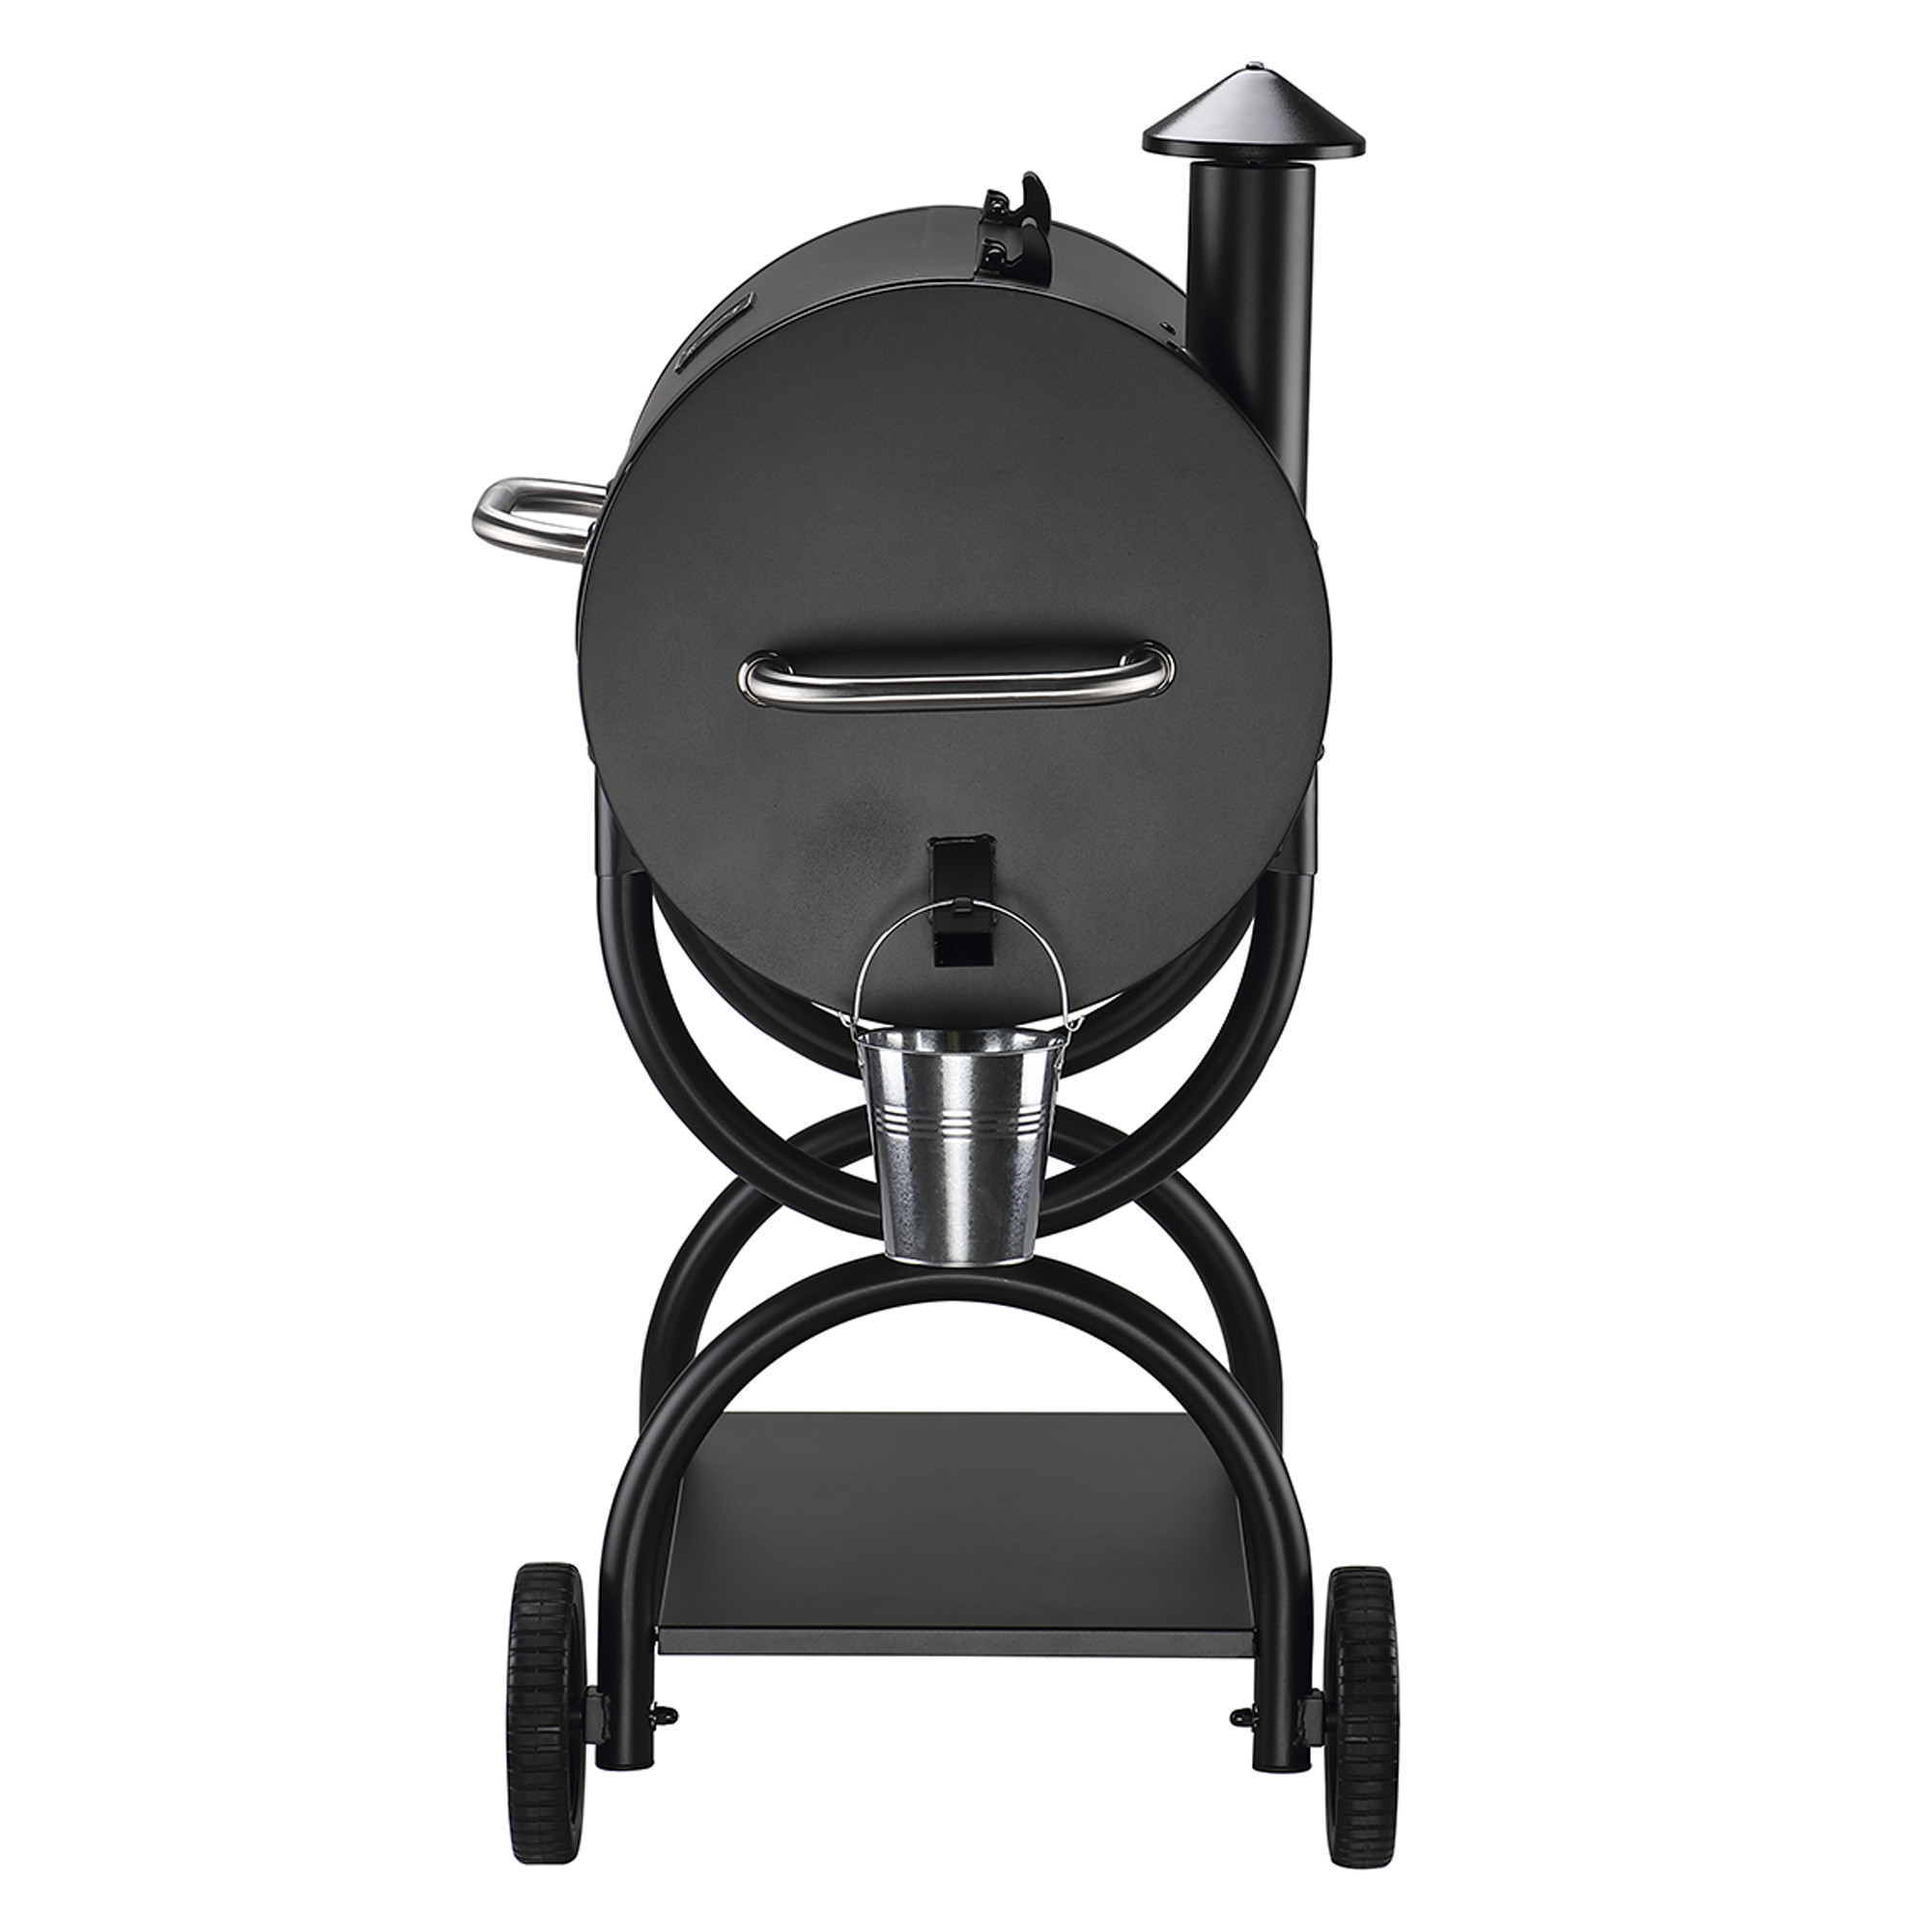 Z GRILLS ZPG-550A 590 sq. in. Wood Pellet Grill and Smoker 7-in-1 BBQ Black - image 3 of 8